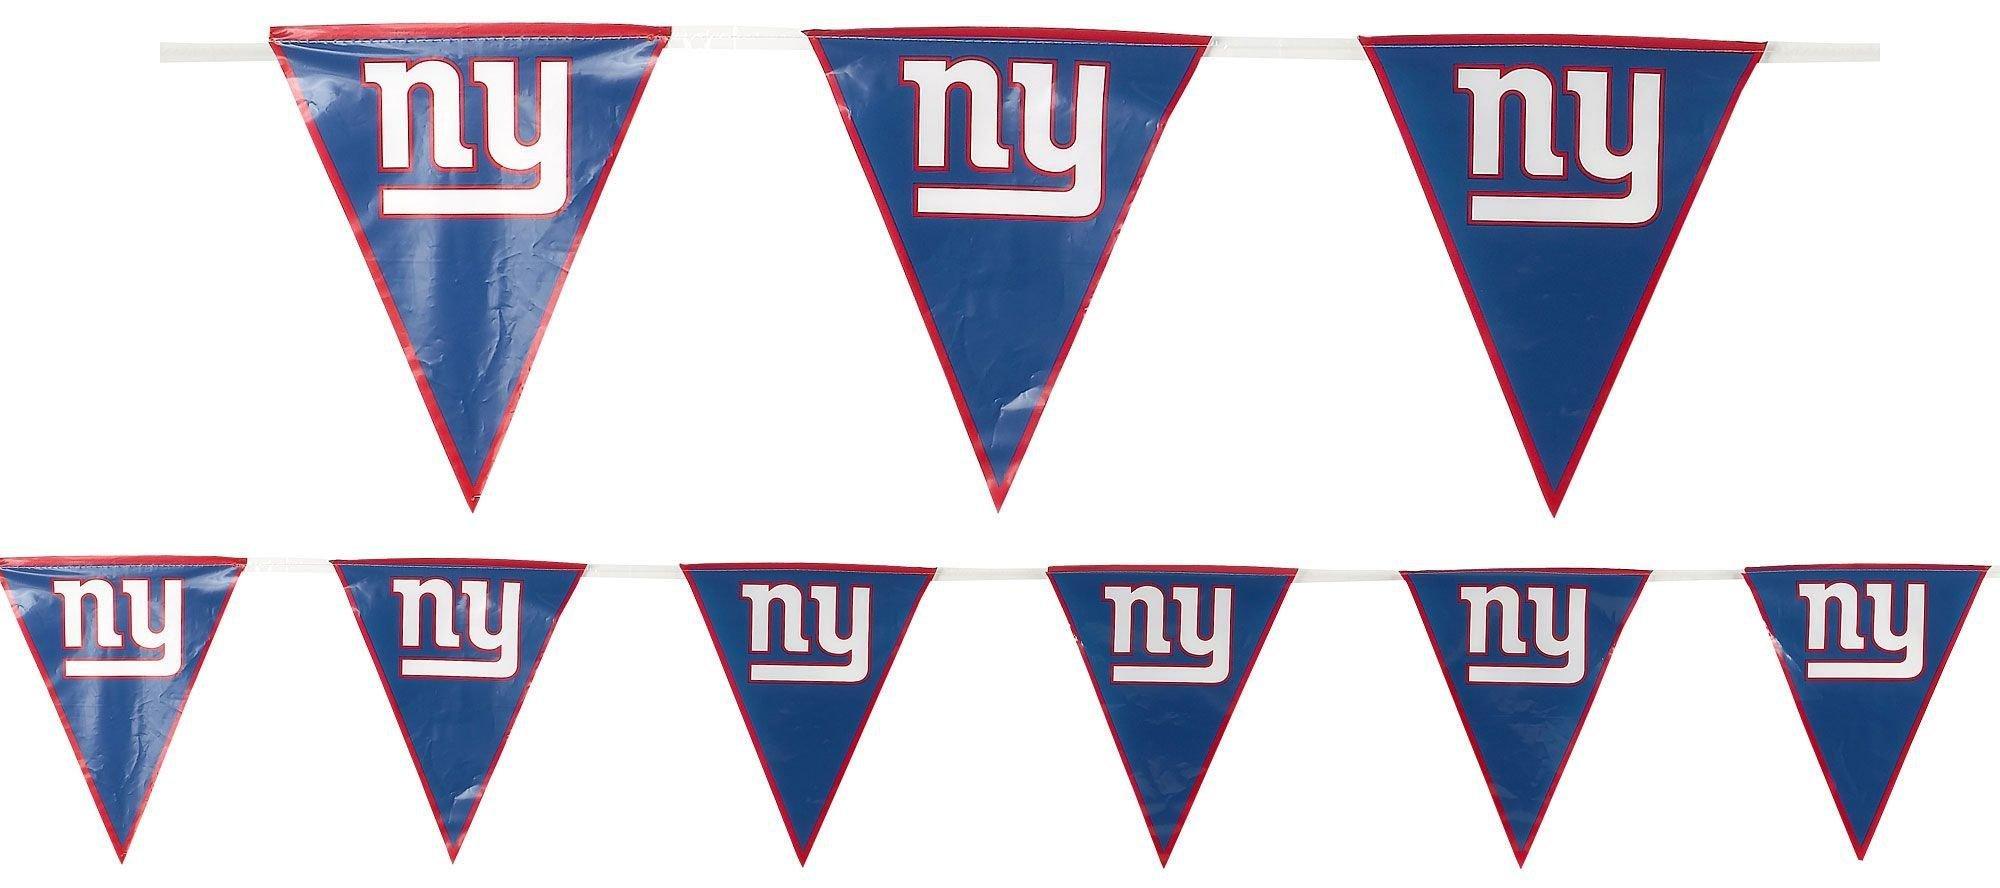 Rico Industries New York Giants Buttons (8 ct) | Party City